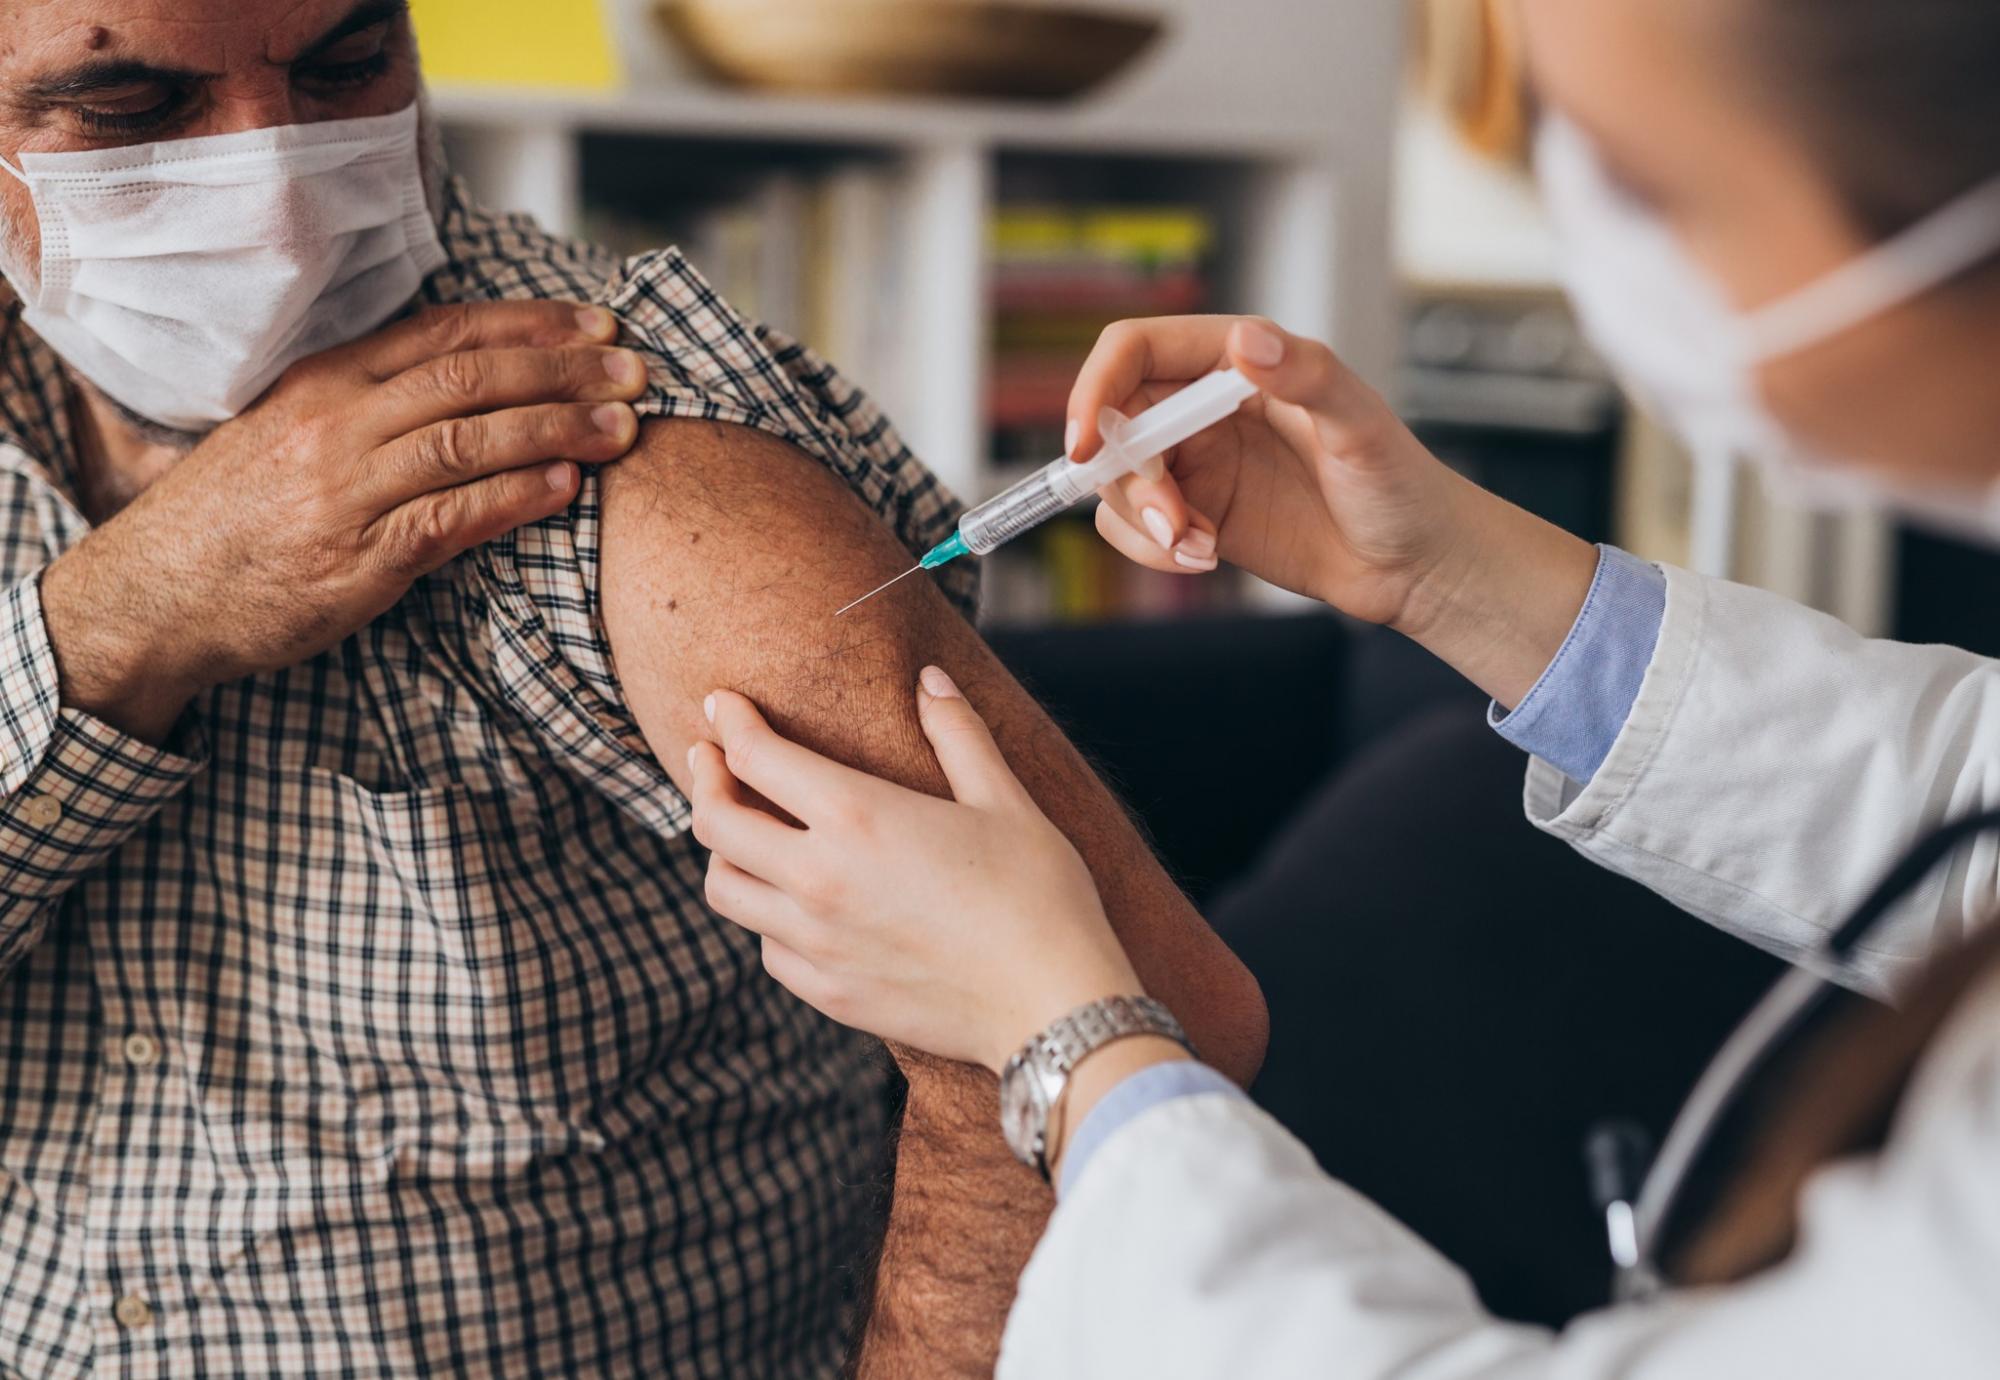 Vaccine jab administered to a patient by a health professional